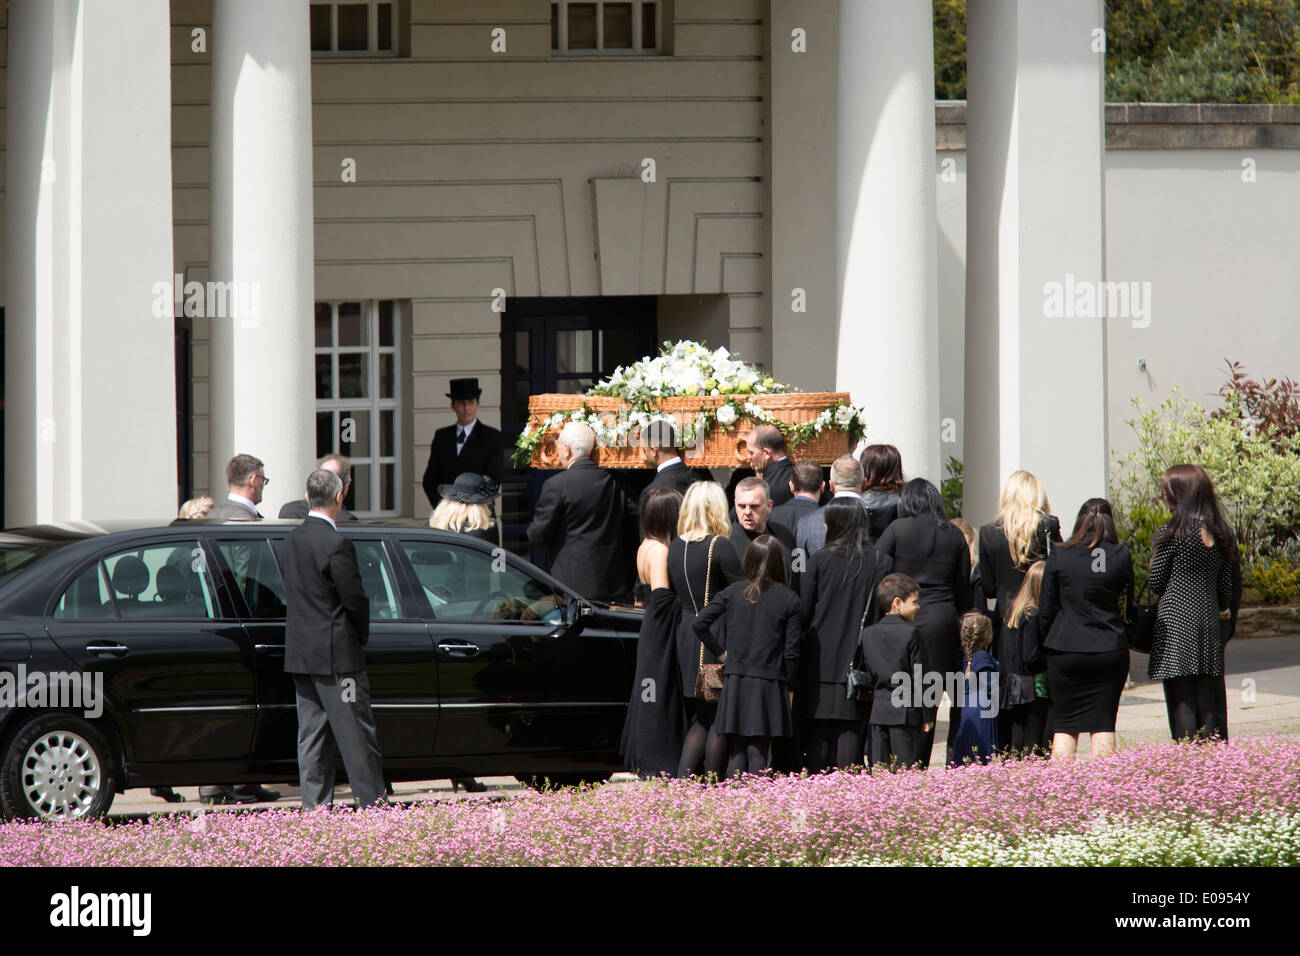 The funeral of author Sue Townsend at De Montfort Hall, Leicester. The ...